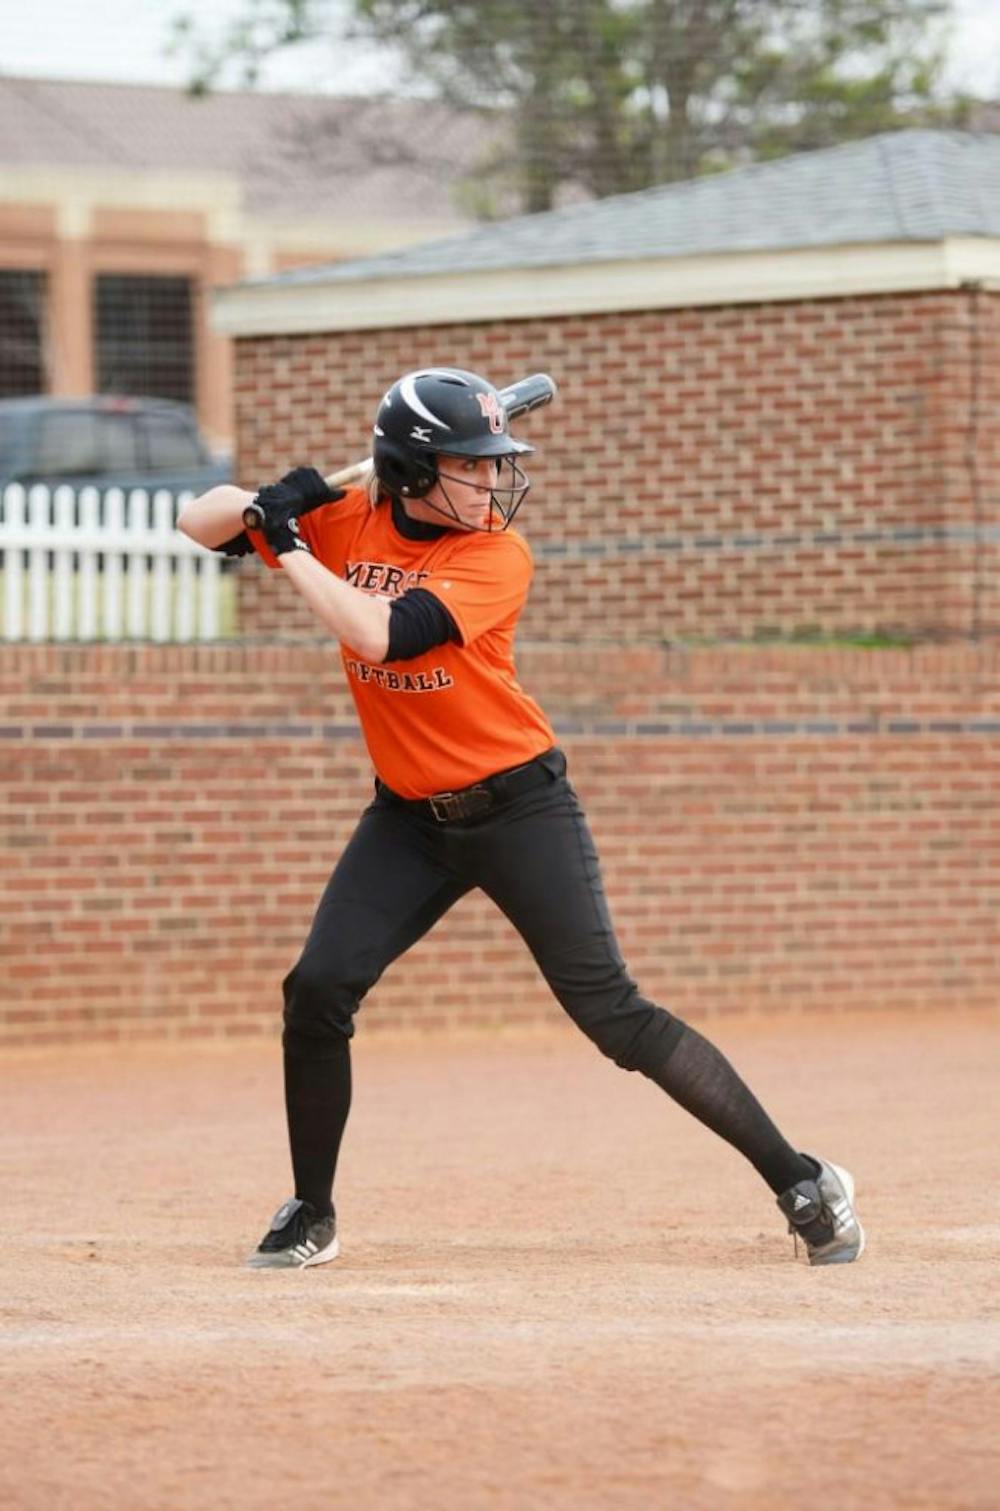 (photo courtesy of MercerBears.com) The softball team hopes to extend their recent hot streak into A-Sun play in March.